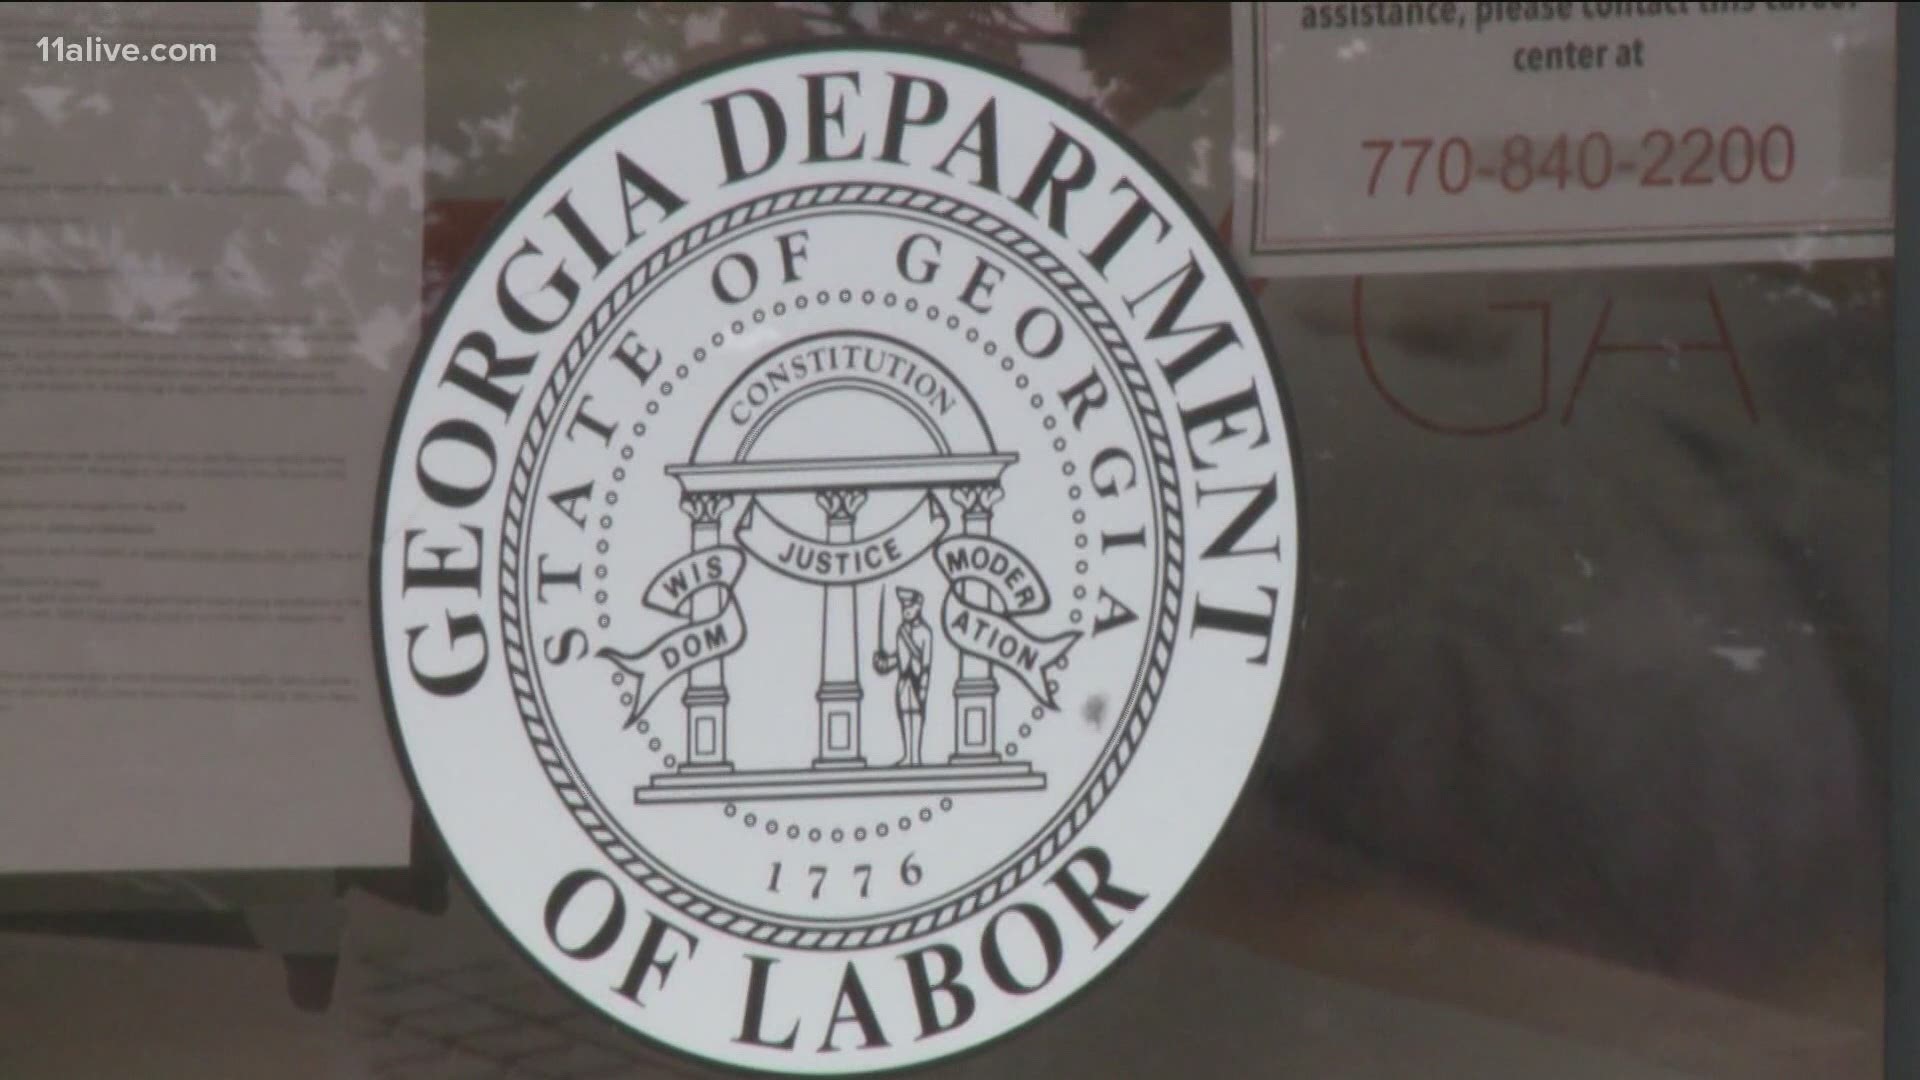 Gov. Brian Kemp announced this month that Georgia would begin refusing the $300 federal unemployment supplement made available last year.